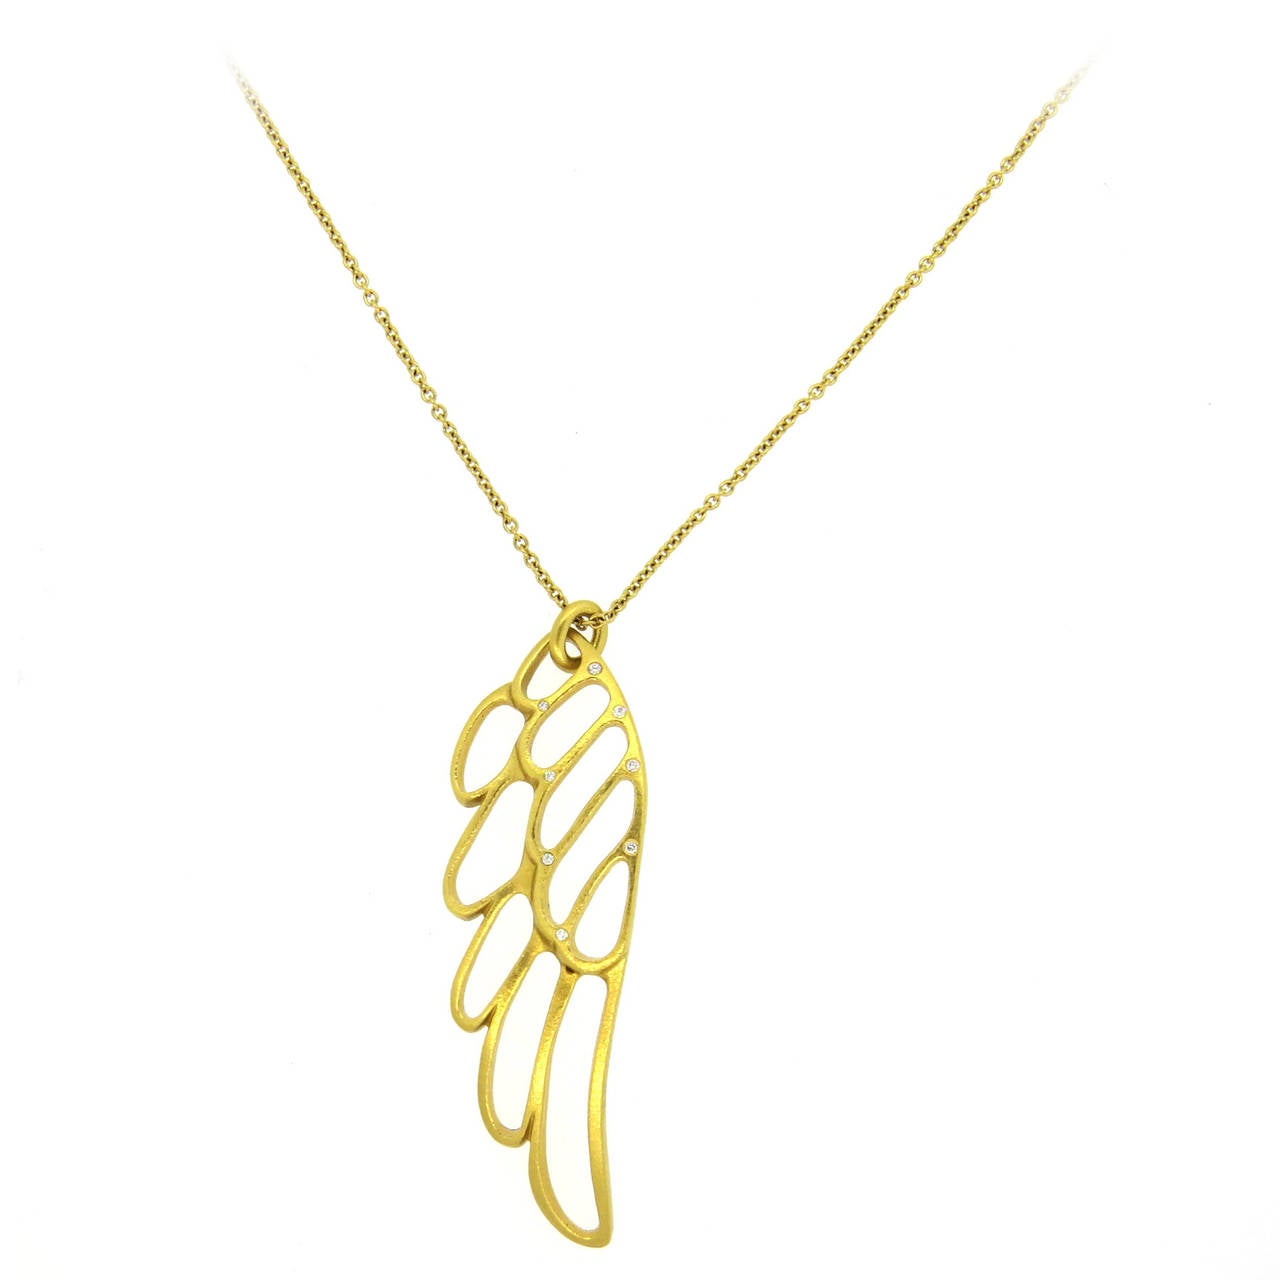 Linda Lee Johnson Diamond Gold Wing of Wire Pendant Necklace